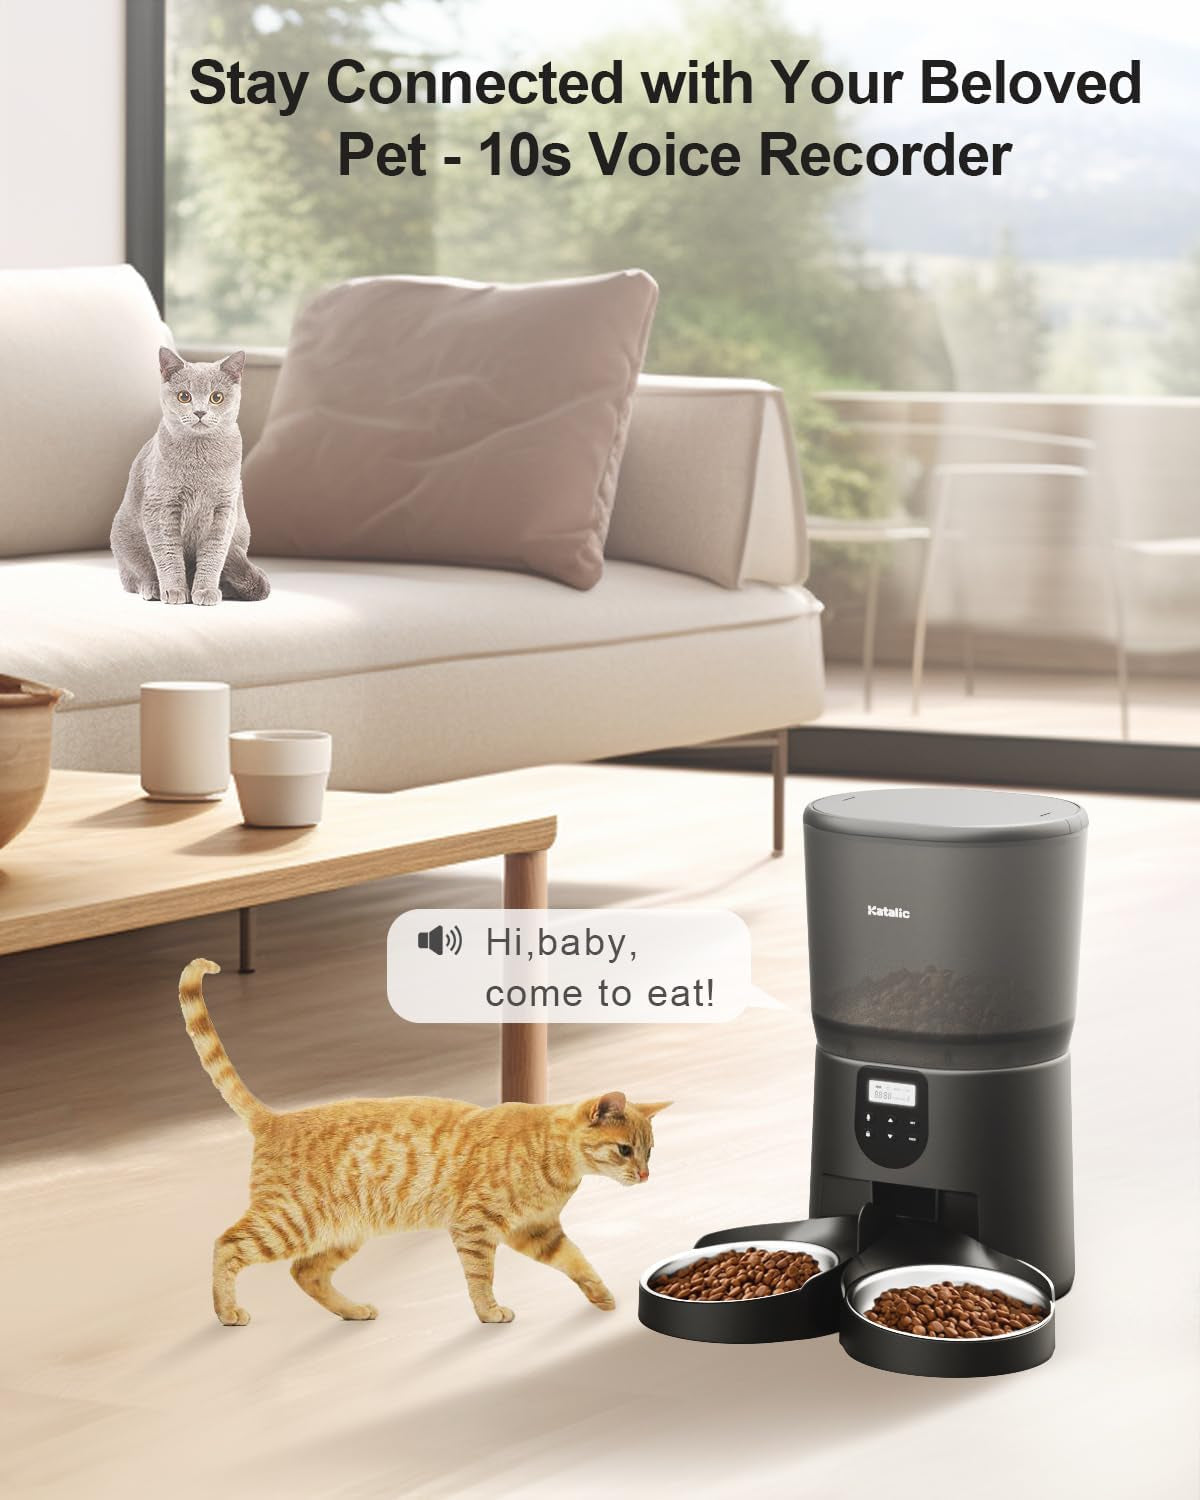 Dual Automatic Cat Feeder with 6L Capacity and Stainless Steel Bowls - Programmable Timer and Meal Call Feature